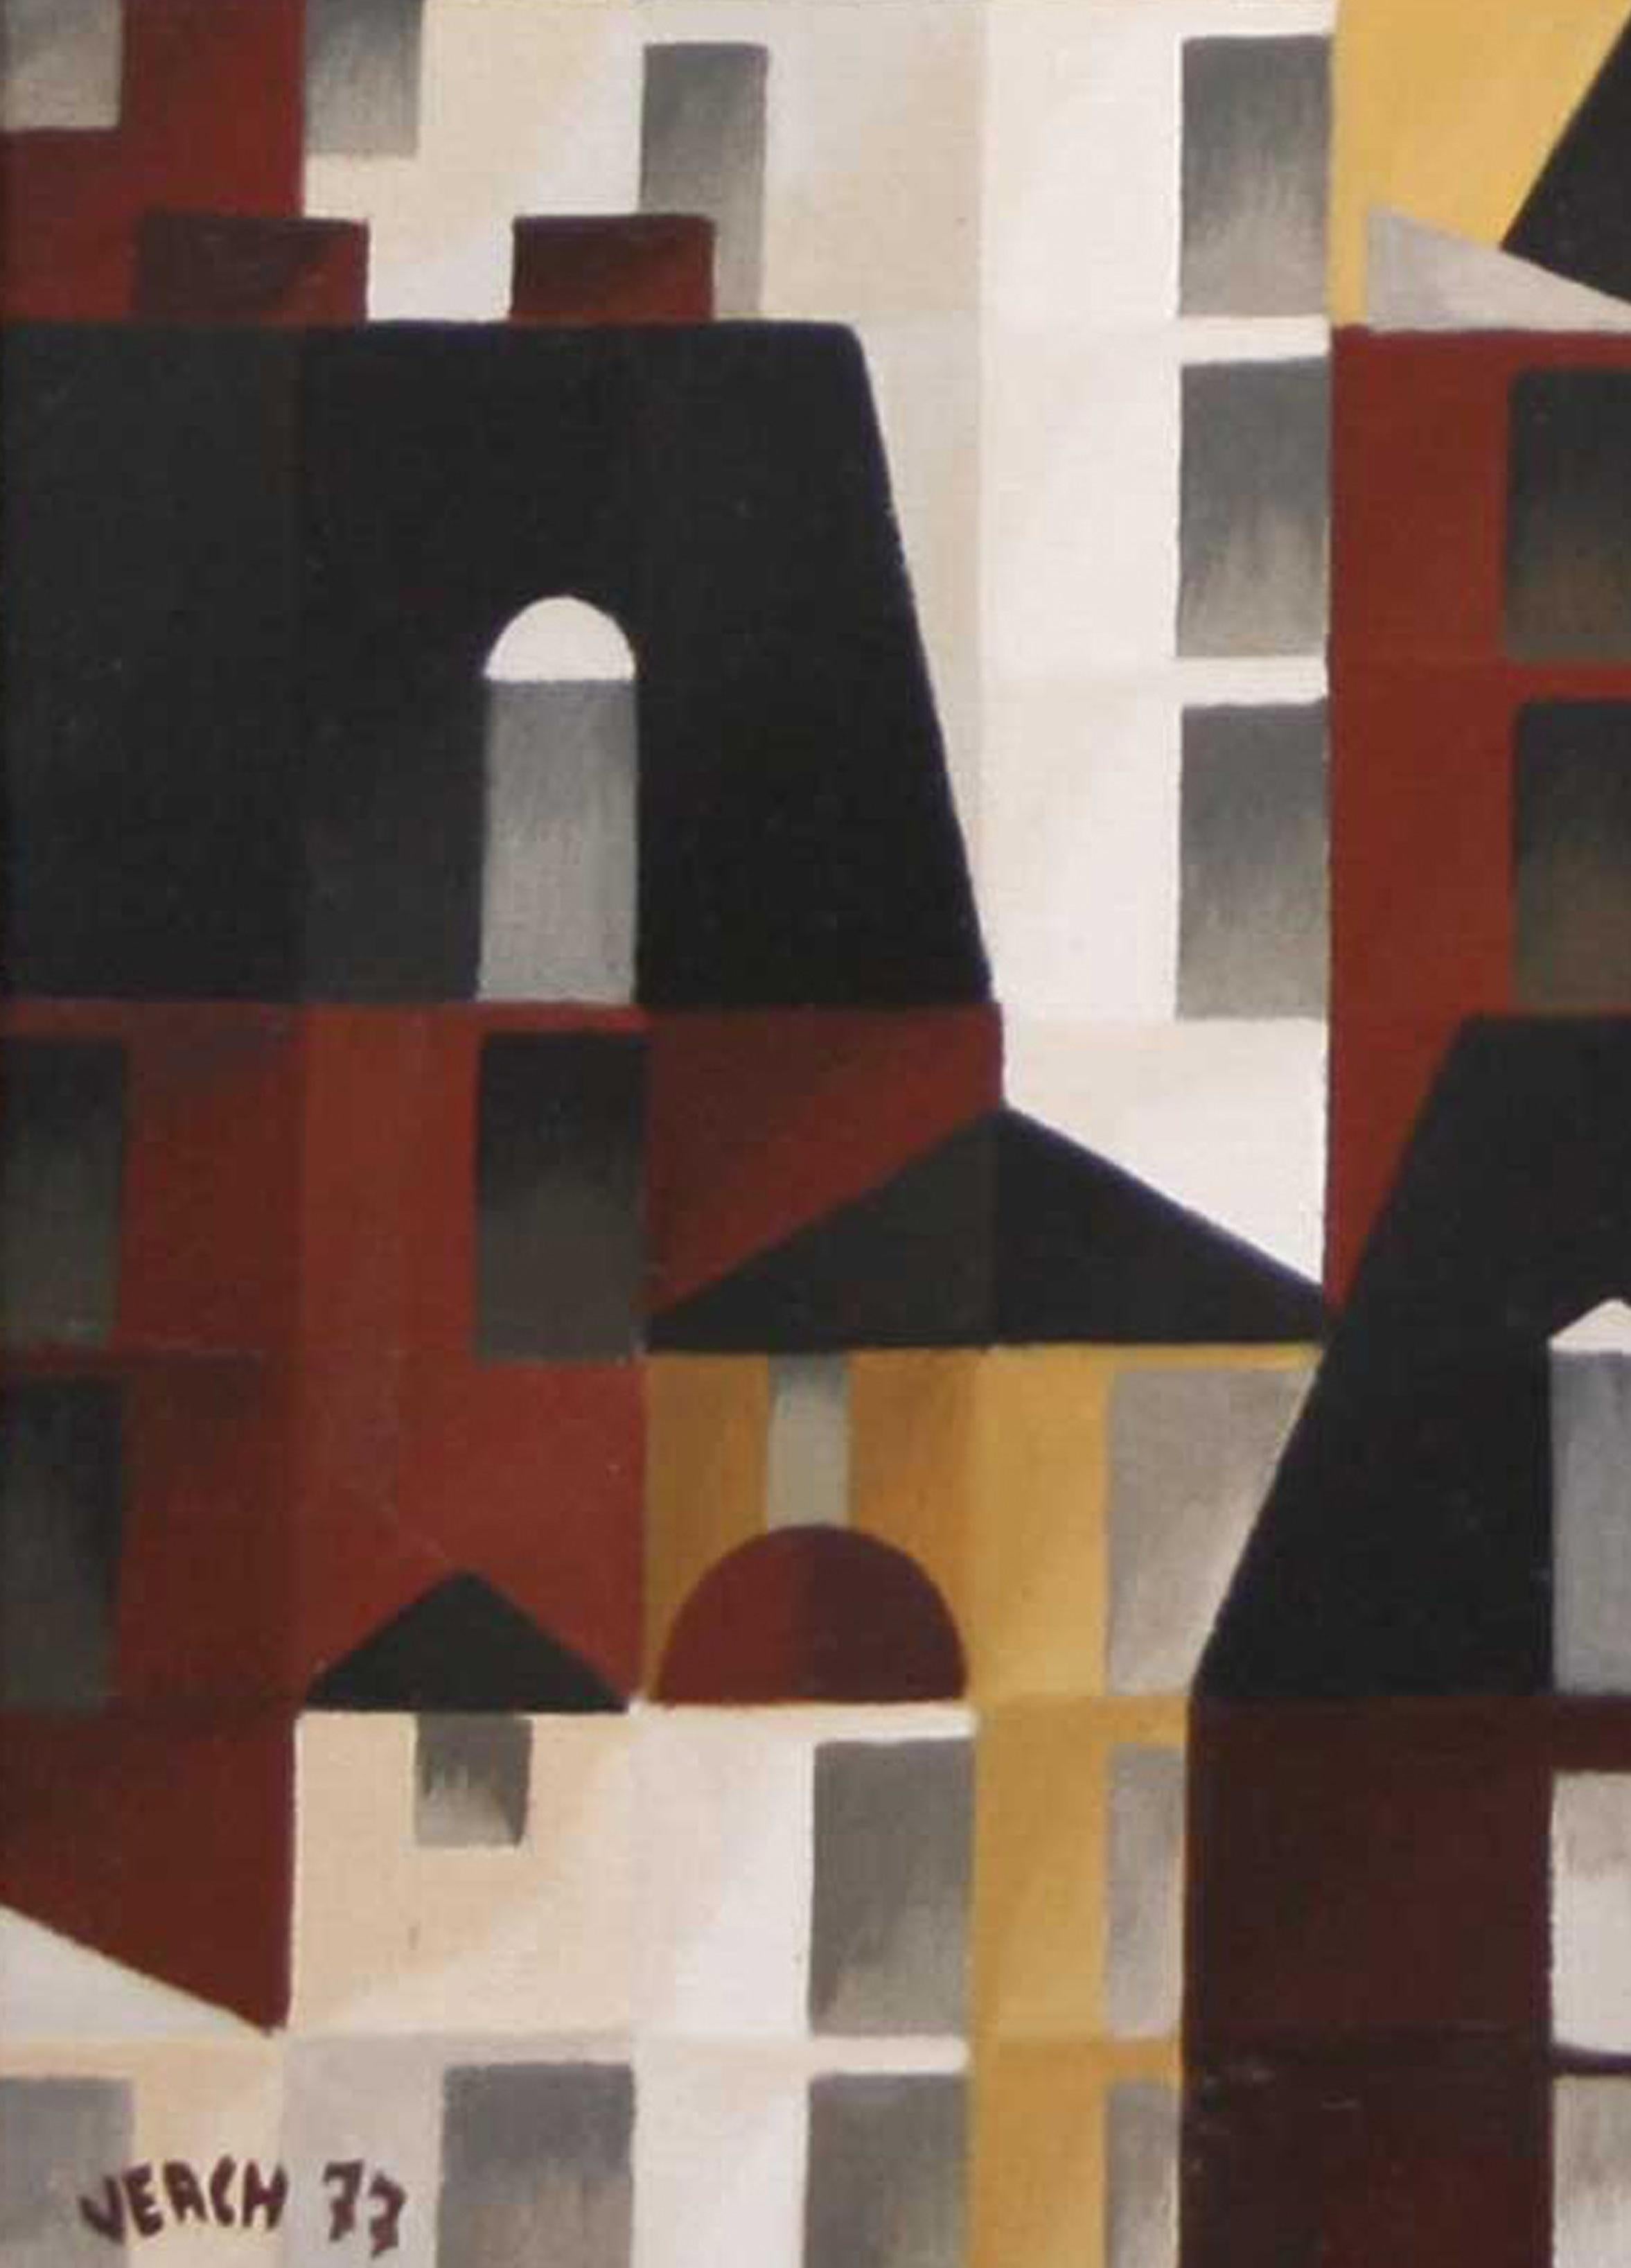 Dächer und Türme / Roofs and Towers - Cubist Painting by Helmut Verch